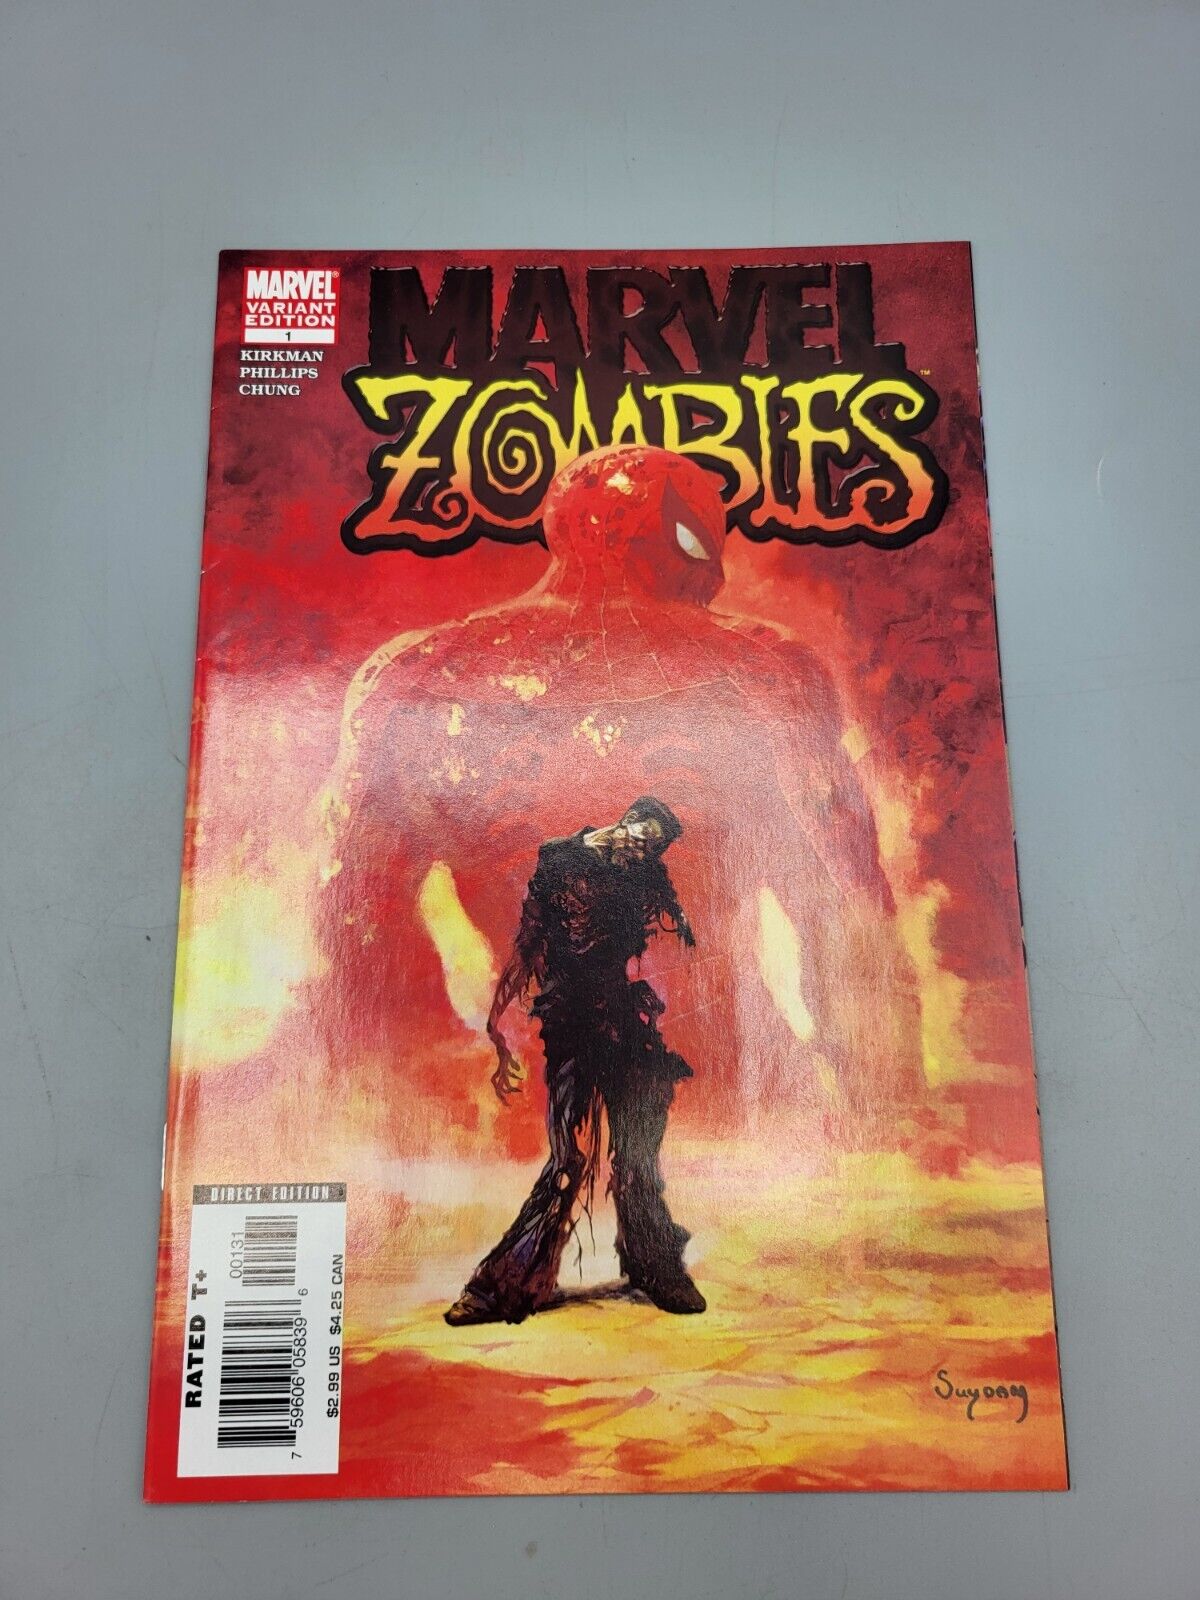 Marvel Zombies Vol 1 #1 May 2006 Marvel Zombies Part 1 Of 5 Third Printing Comic